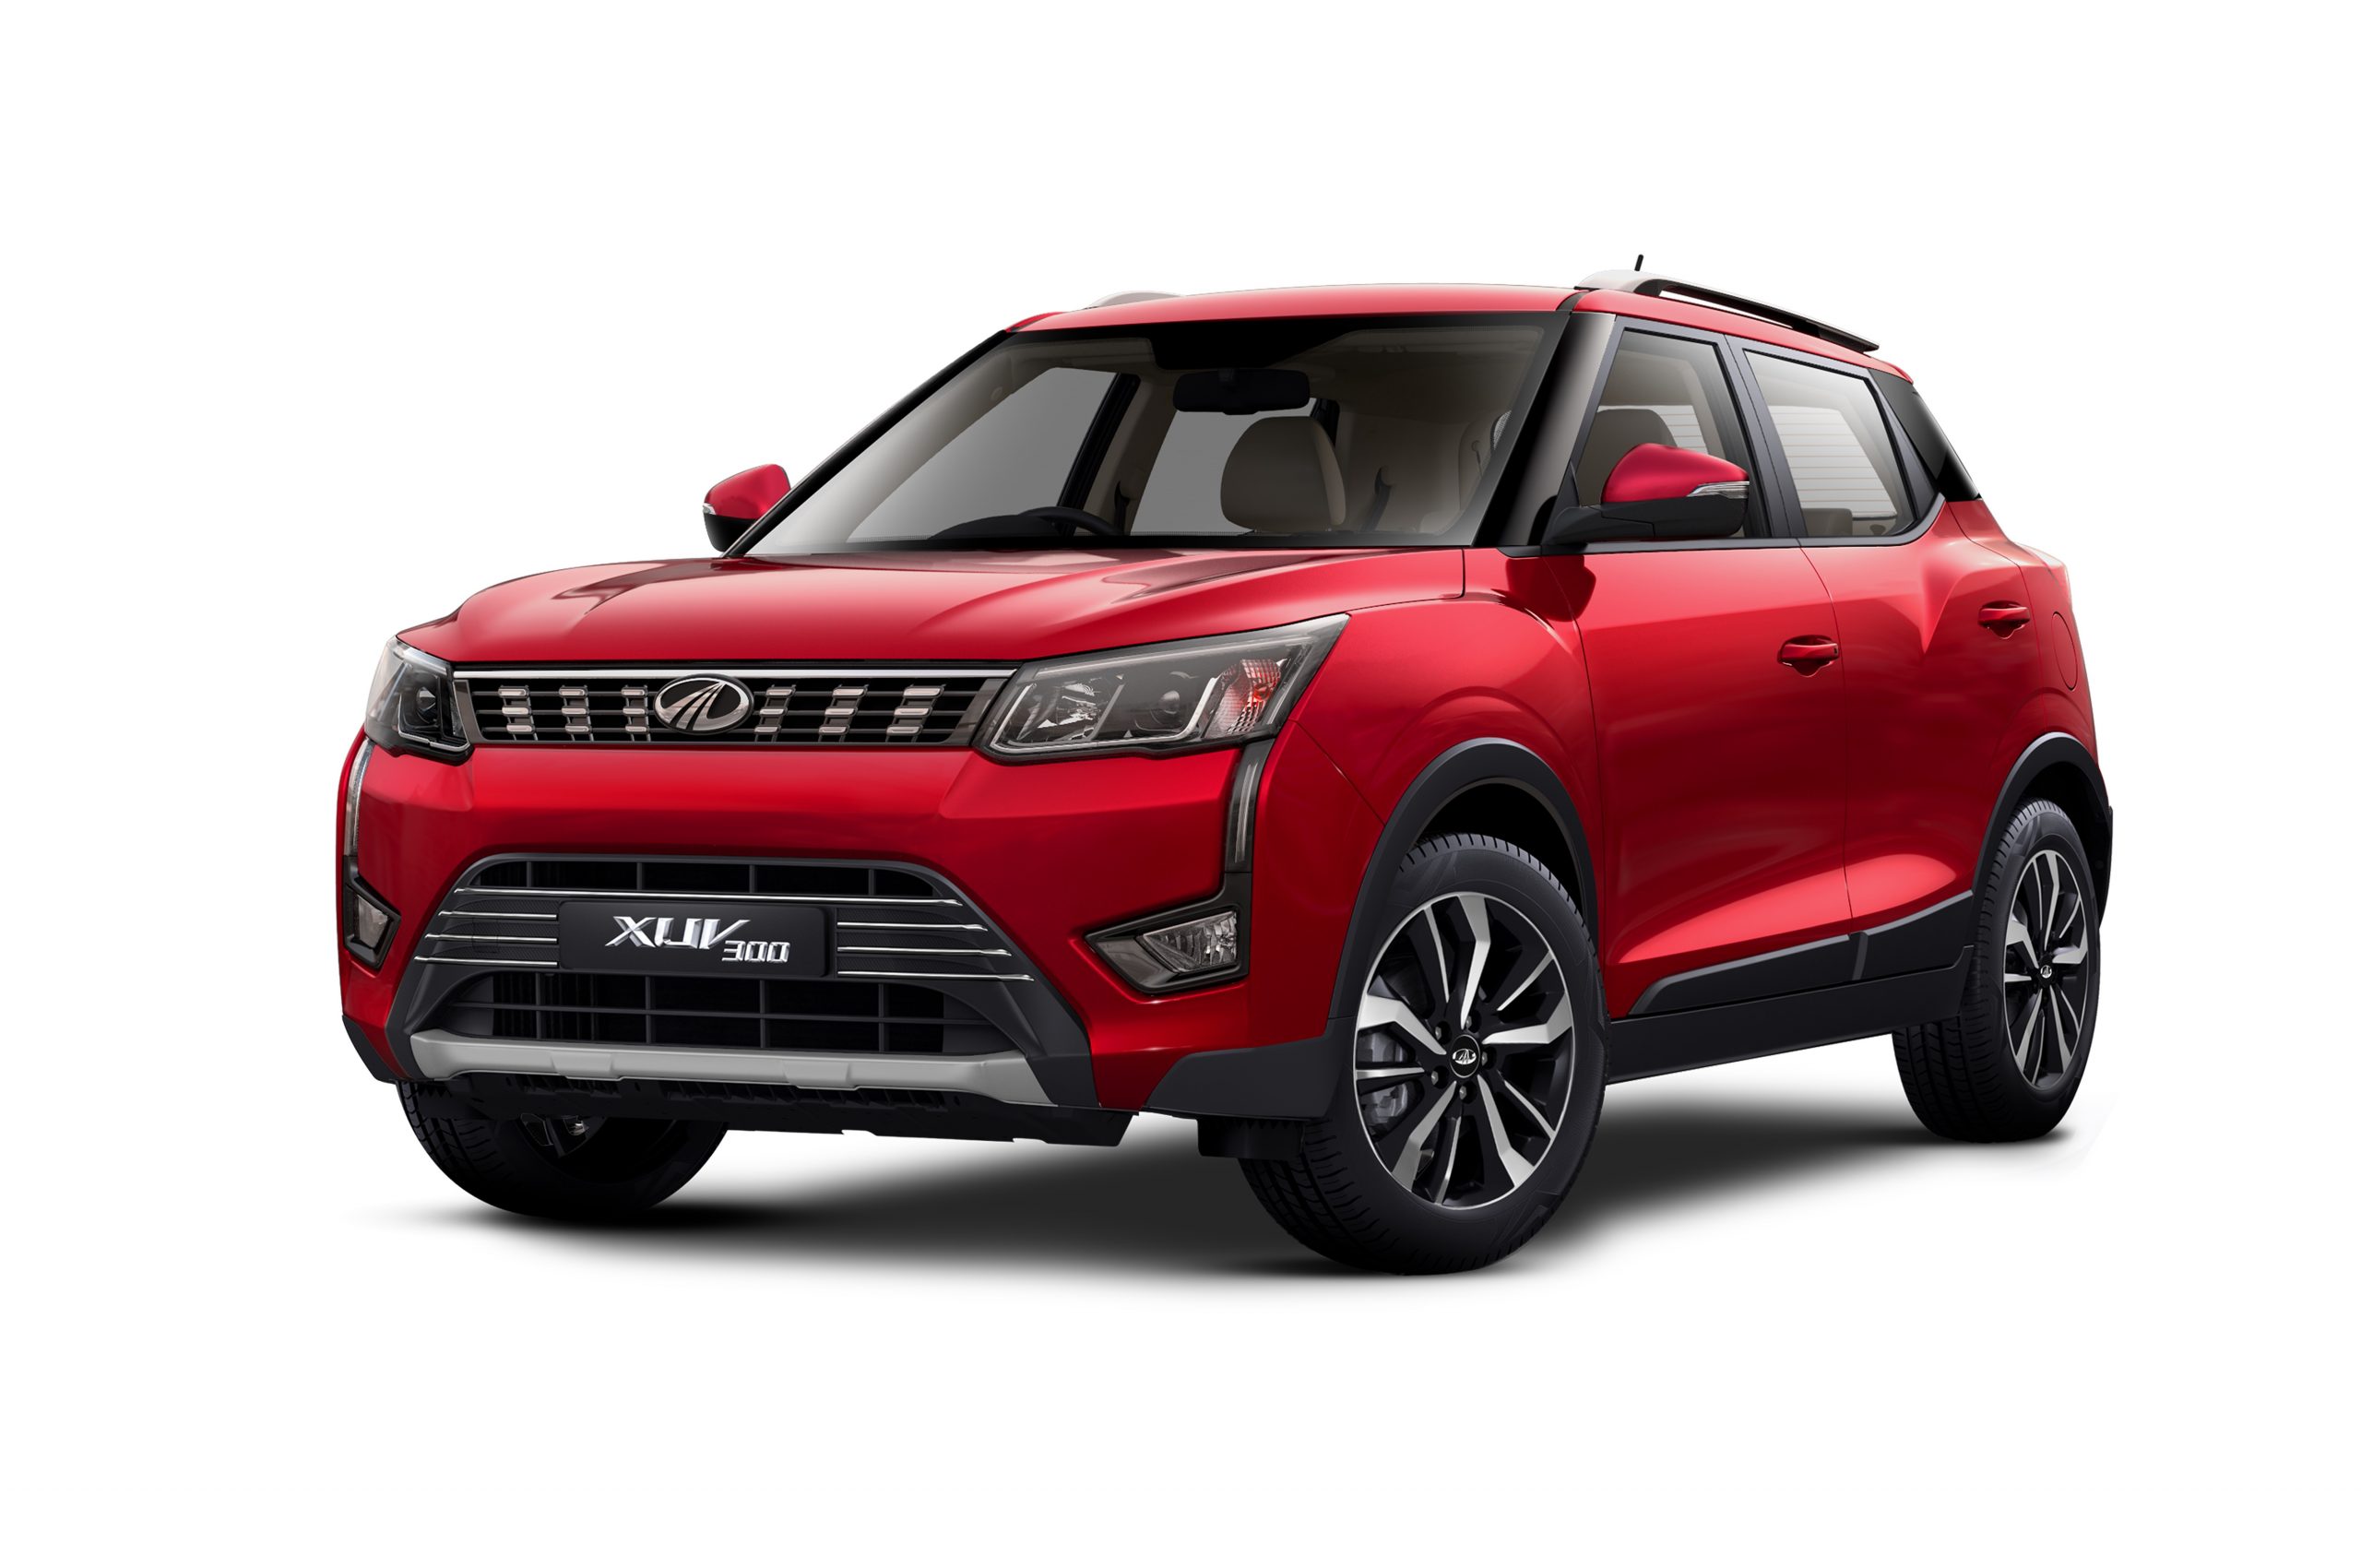 Global NCAP crowns Mahindra XUV300 safest Indian car between 2014 and 2020